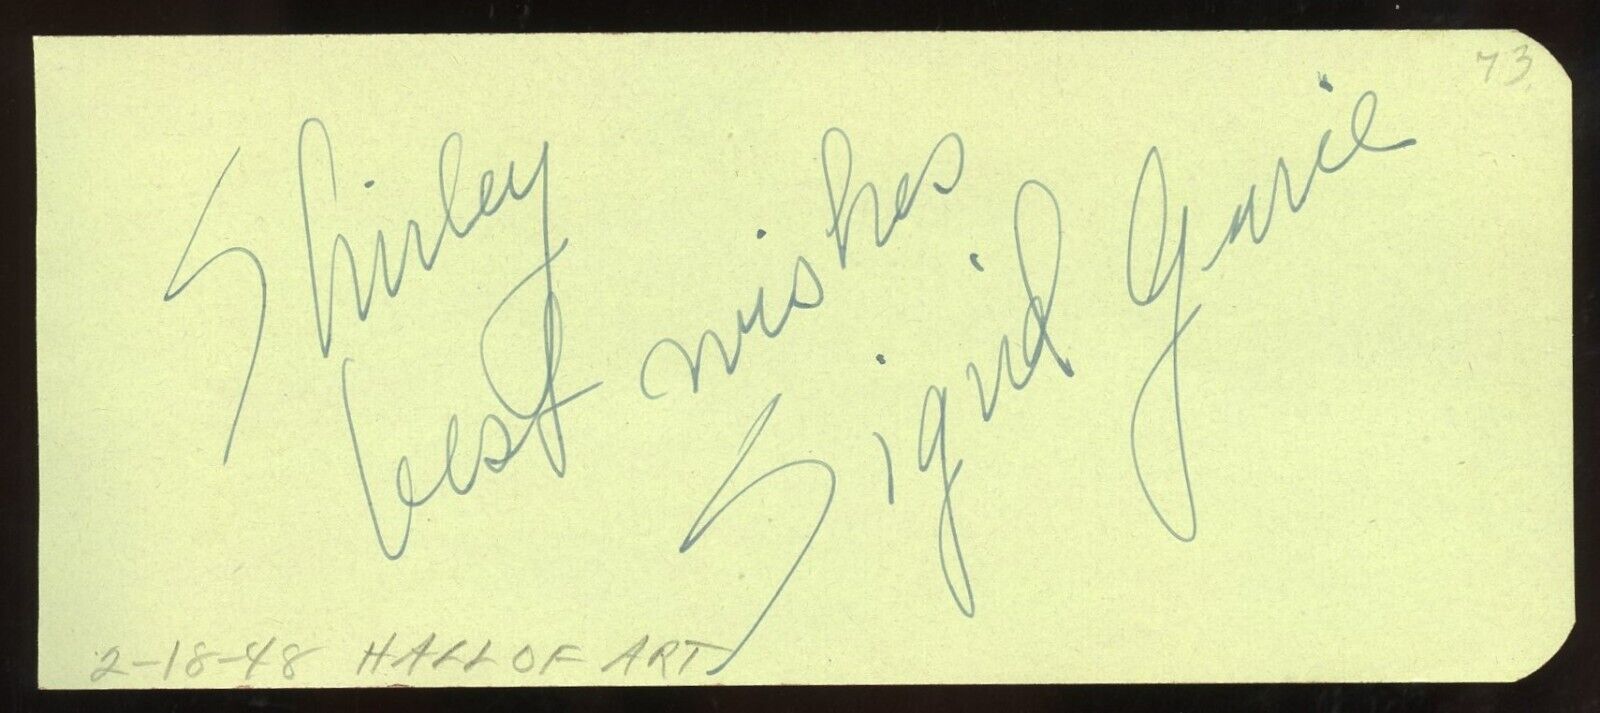 Sigrid Gurie d1969 signed 2x5 cut autograph on 2-18-48 at Hall of Art CA